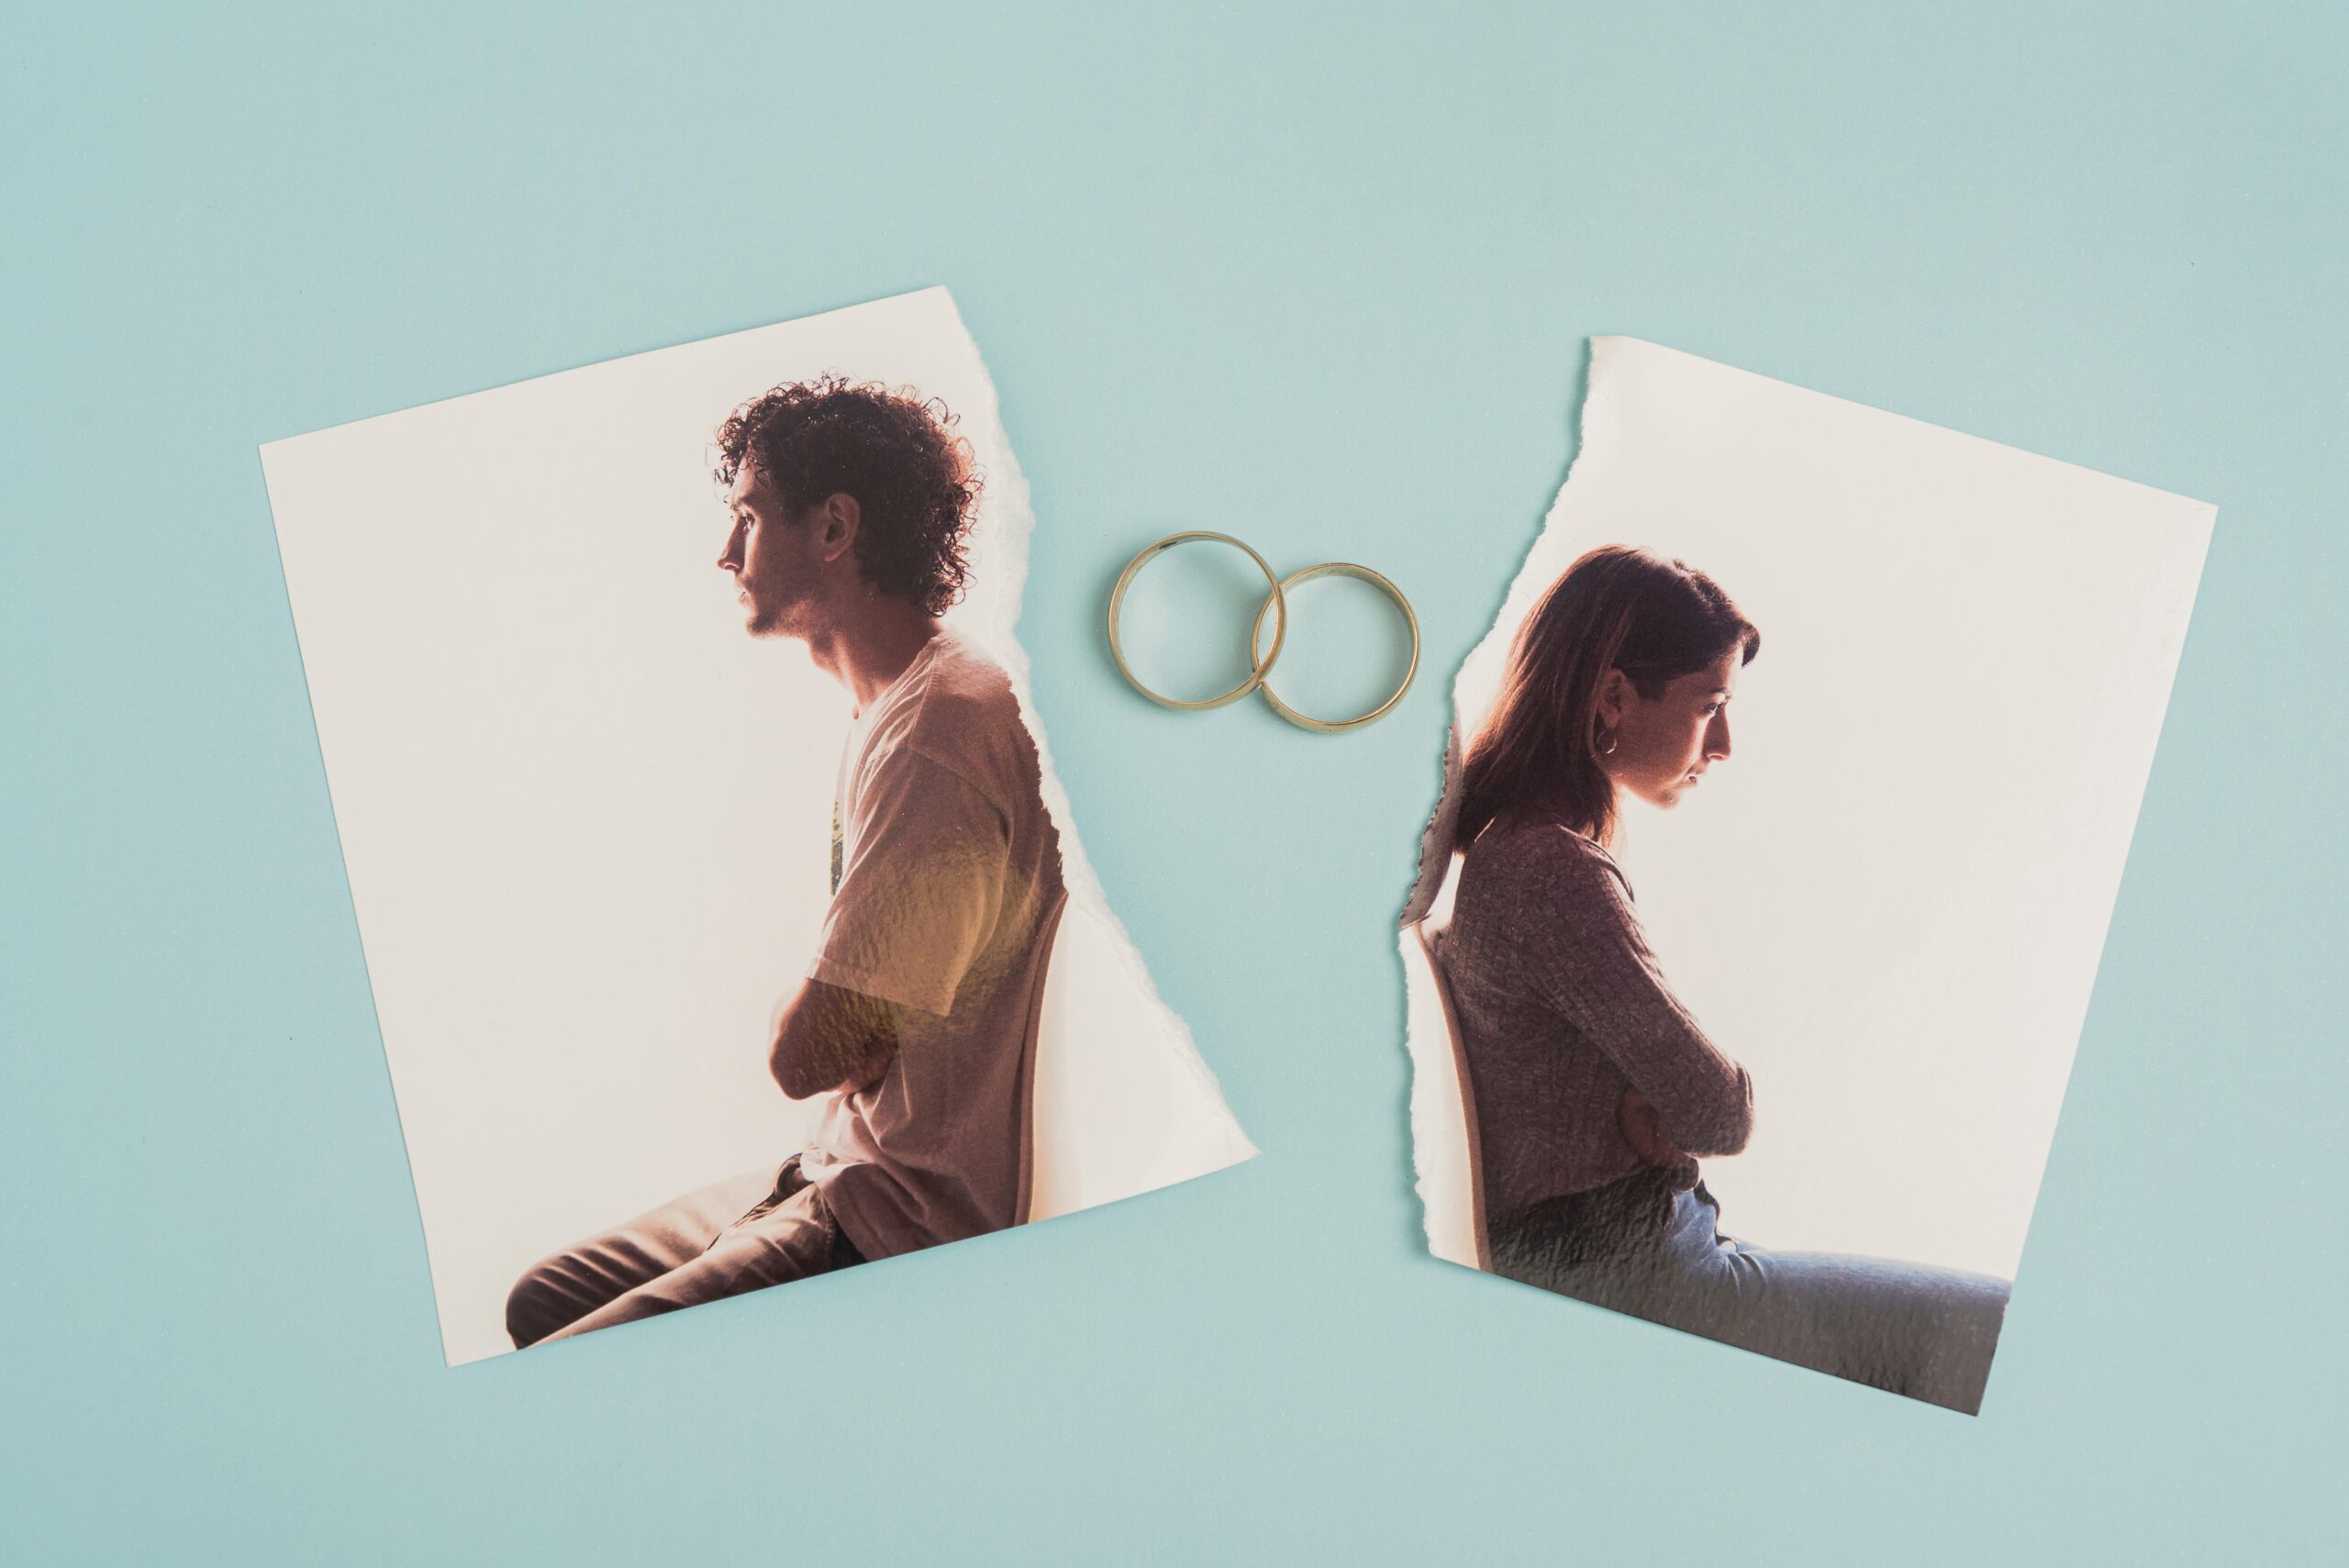 Image of a couple once sitting side by side is split in half, with their marriage rings in between to signify their separation.